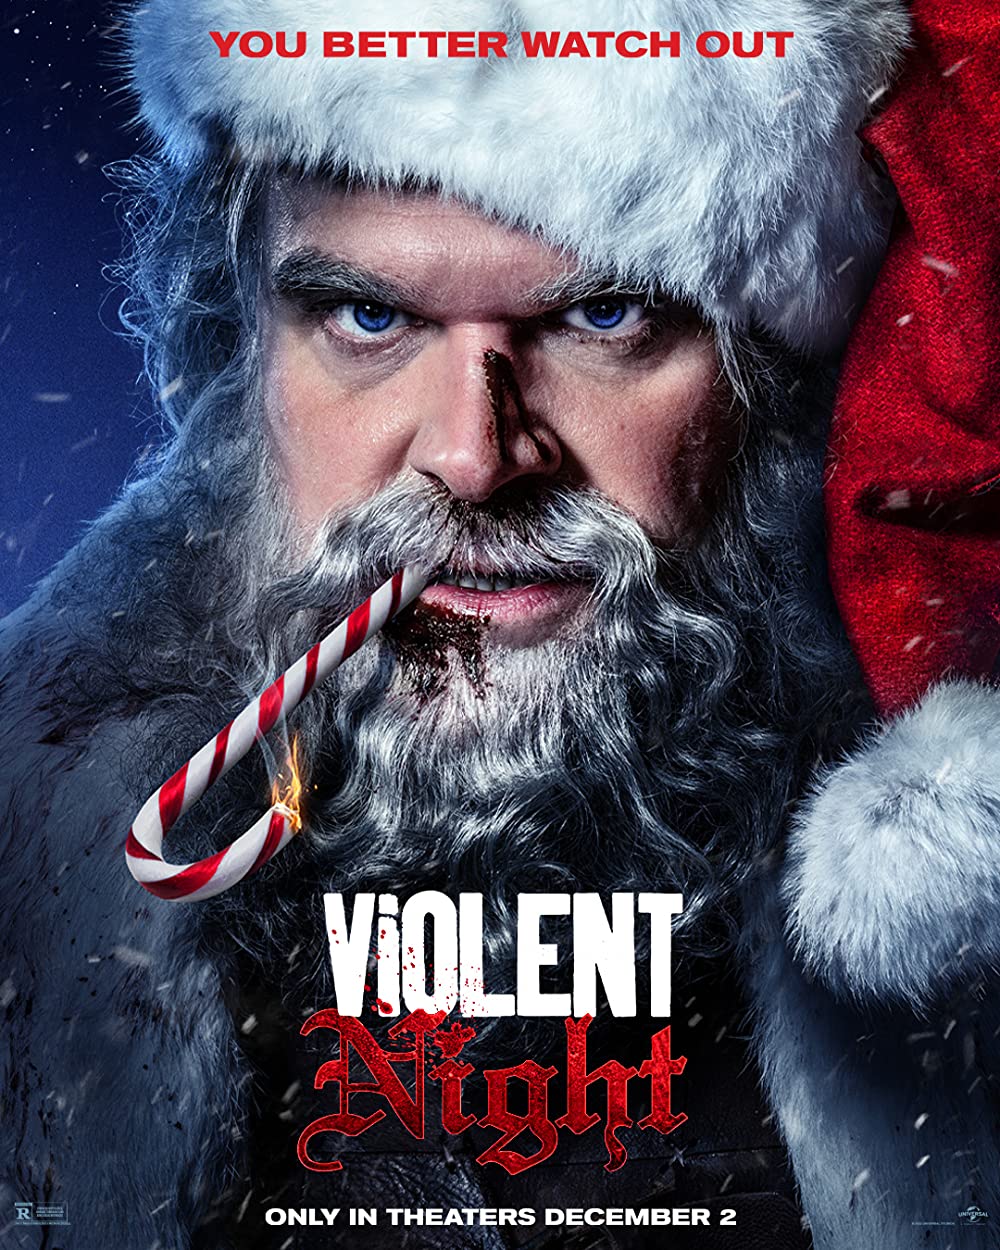 Poster featuring David Harbour as Santa biting on a candy cane